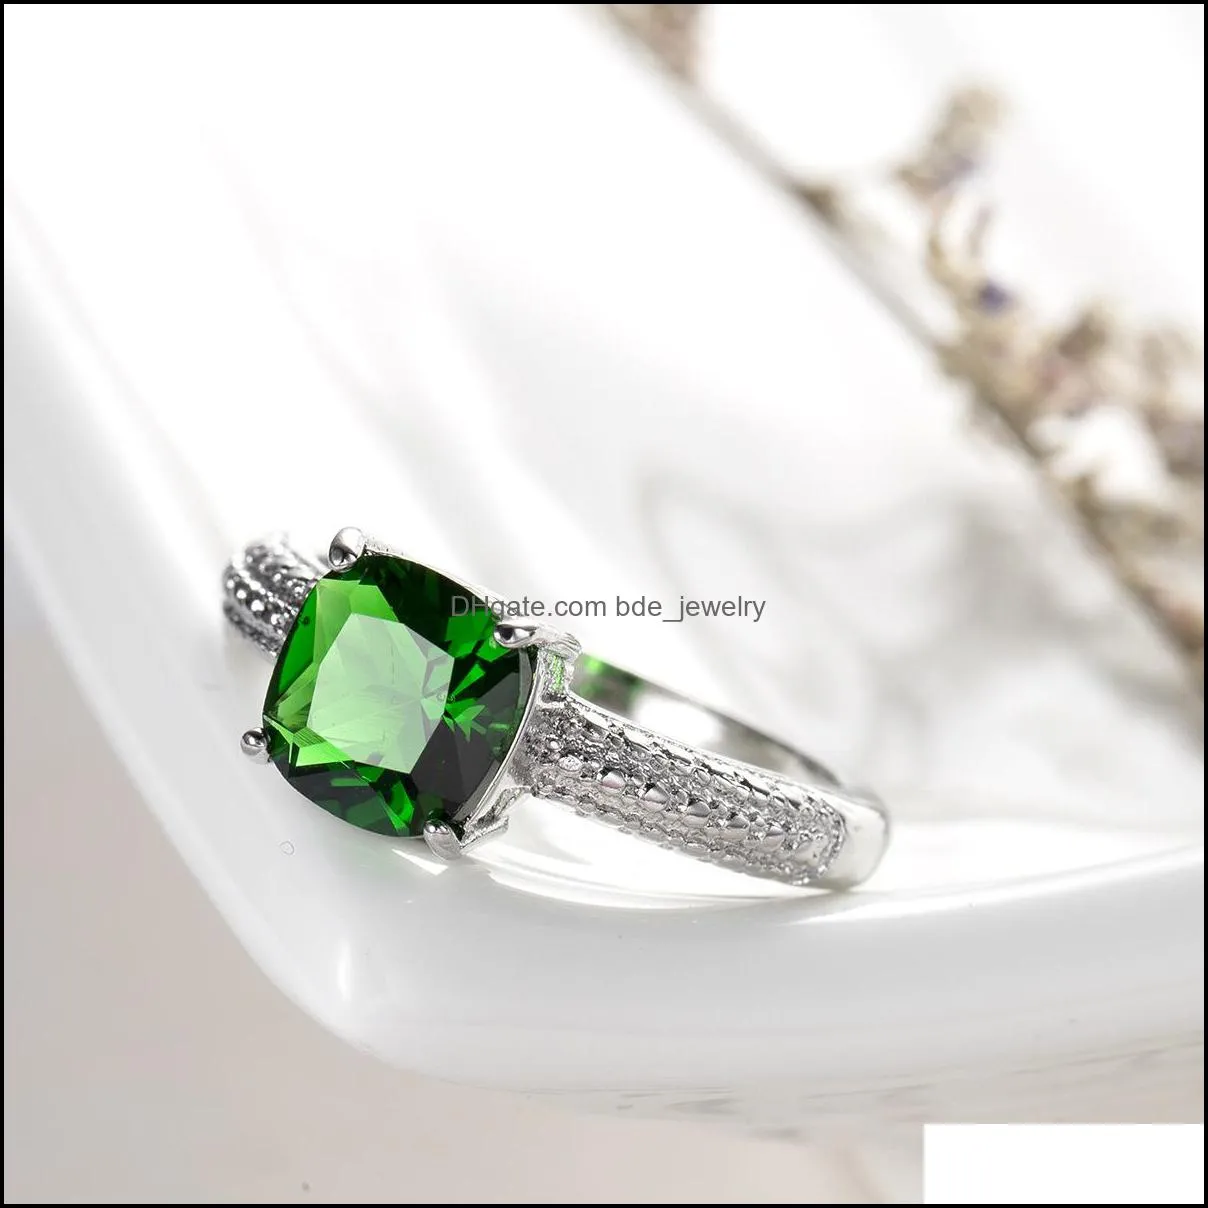 12 Pcs Holiday gift Square emerald Gemstone 925 Sterling Silver Plated Weddiing Rings Europe popular Cz Zircon Rings NEW